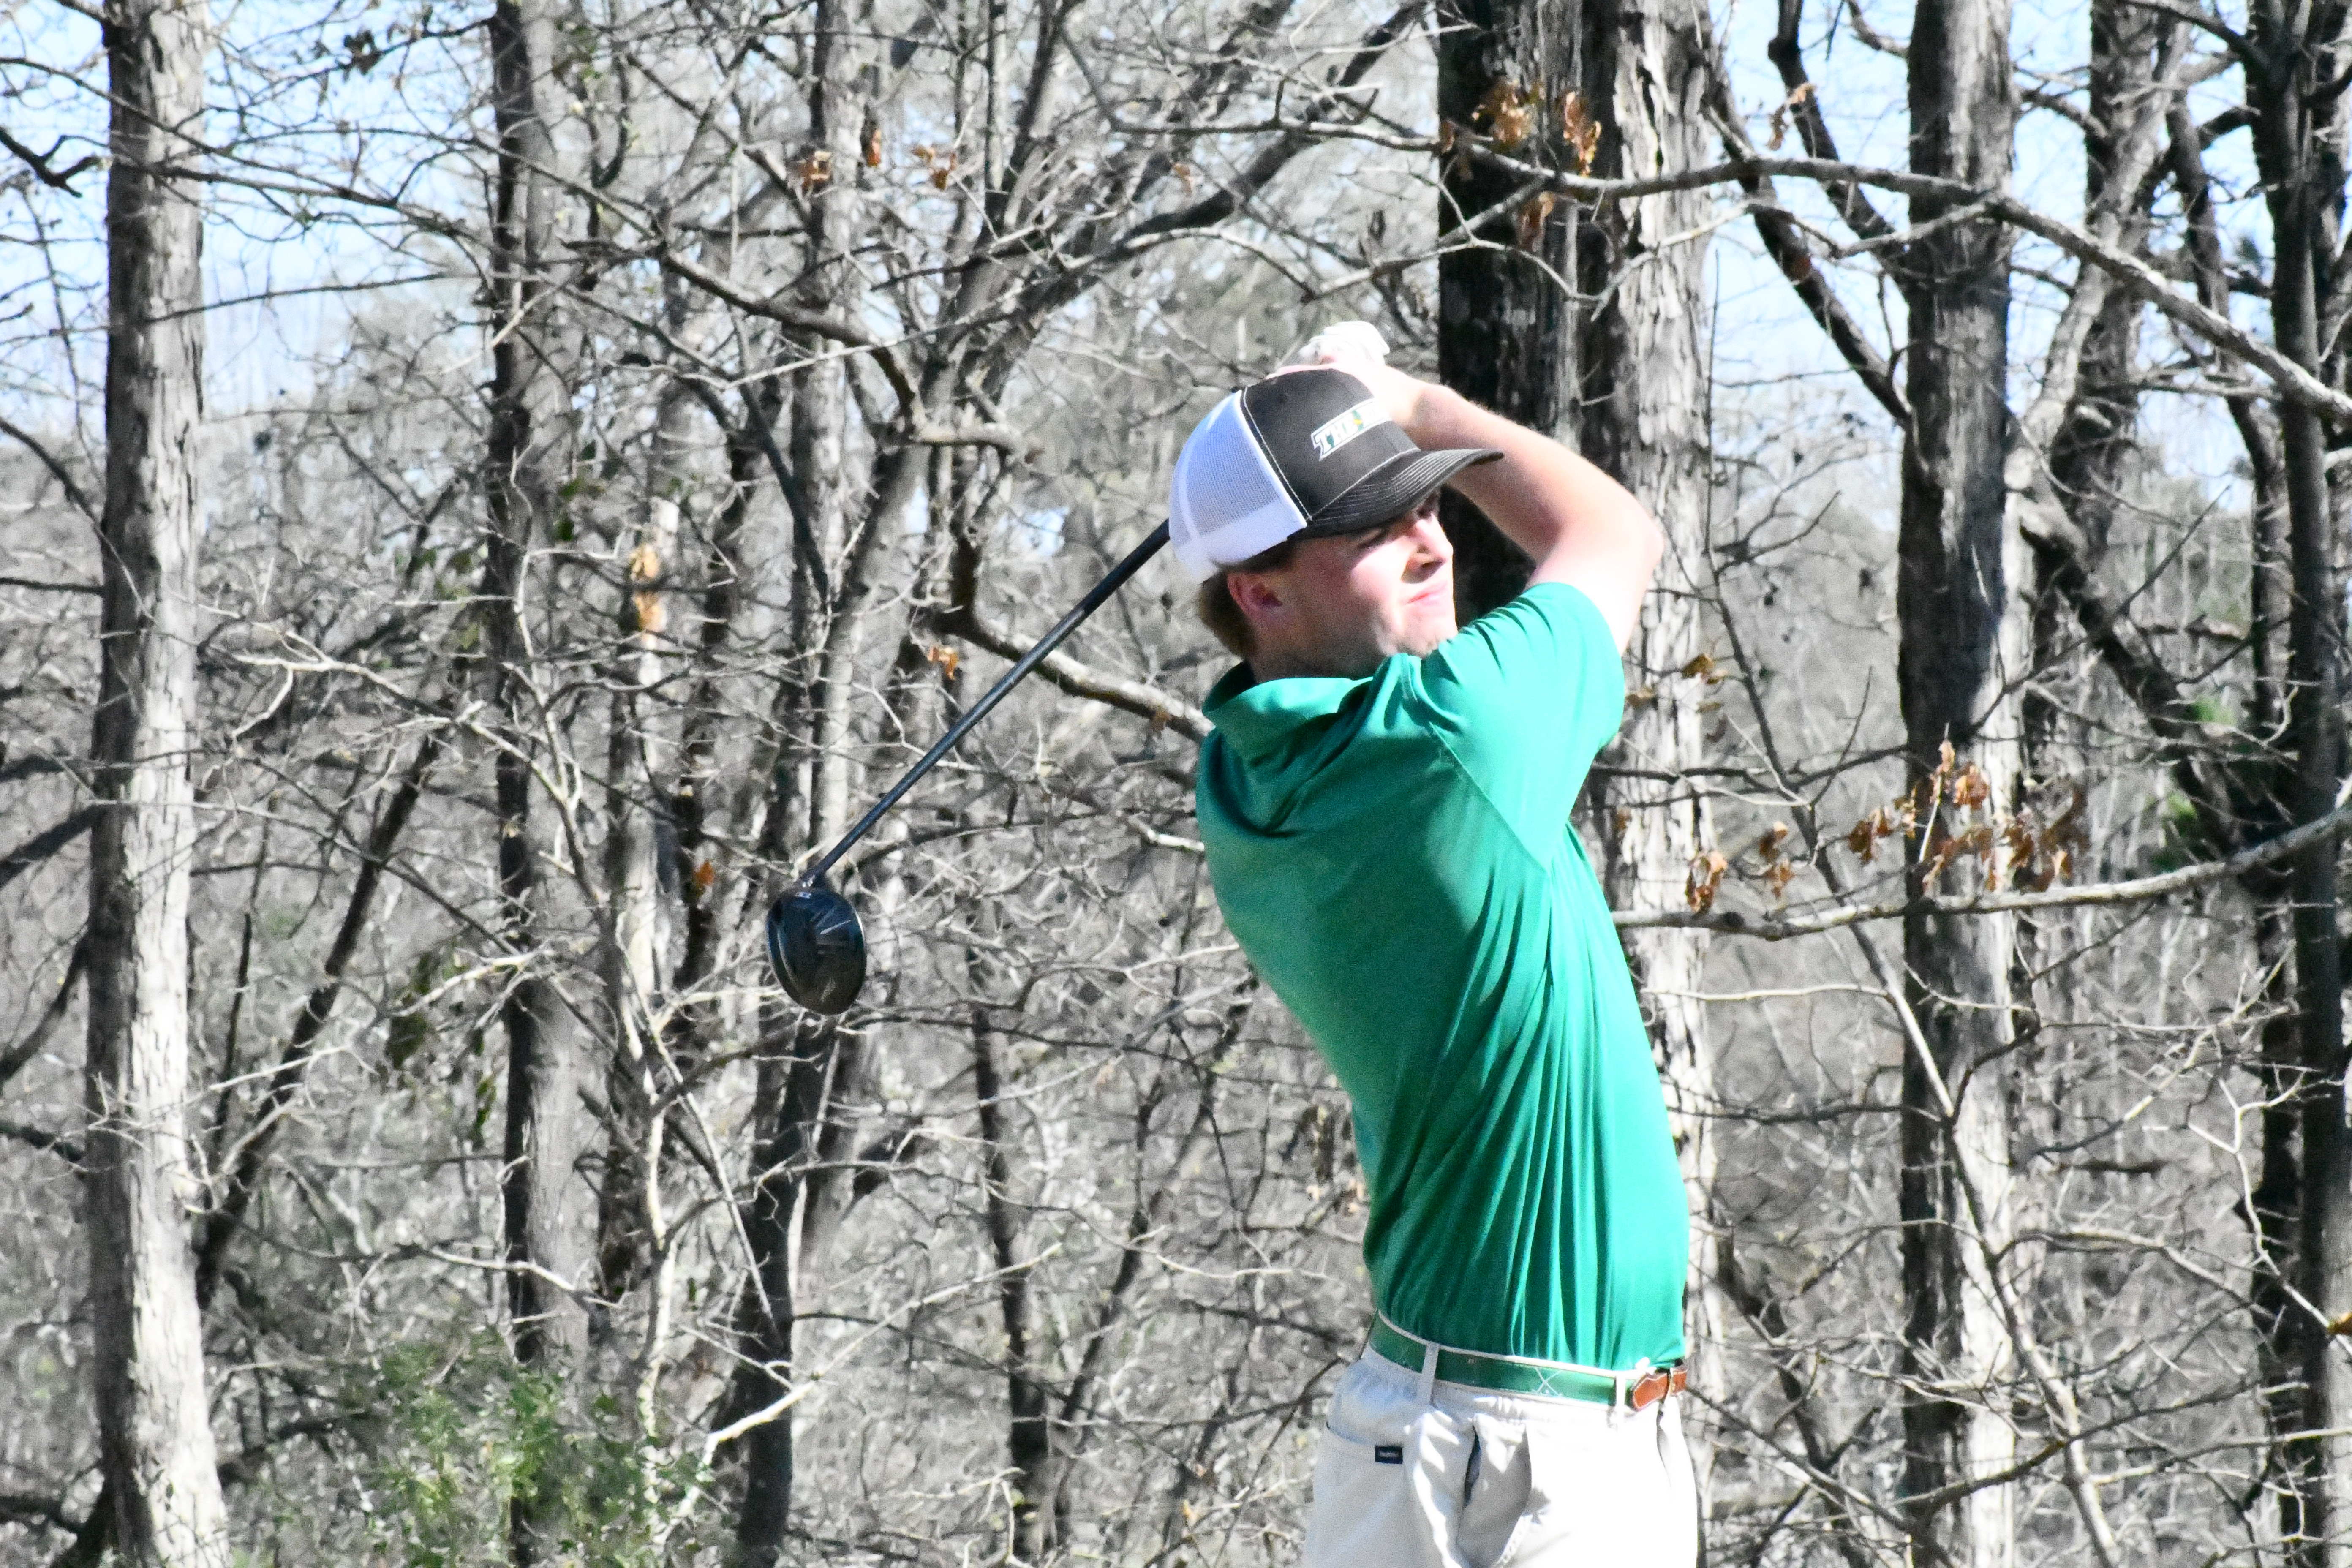 Copperheads grab win on the golf course (March 25 Roundup)